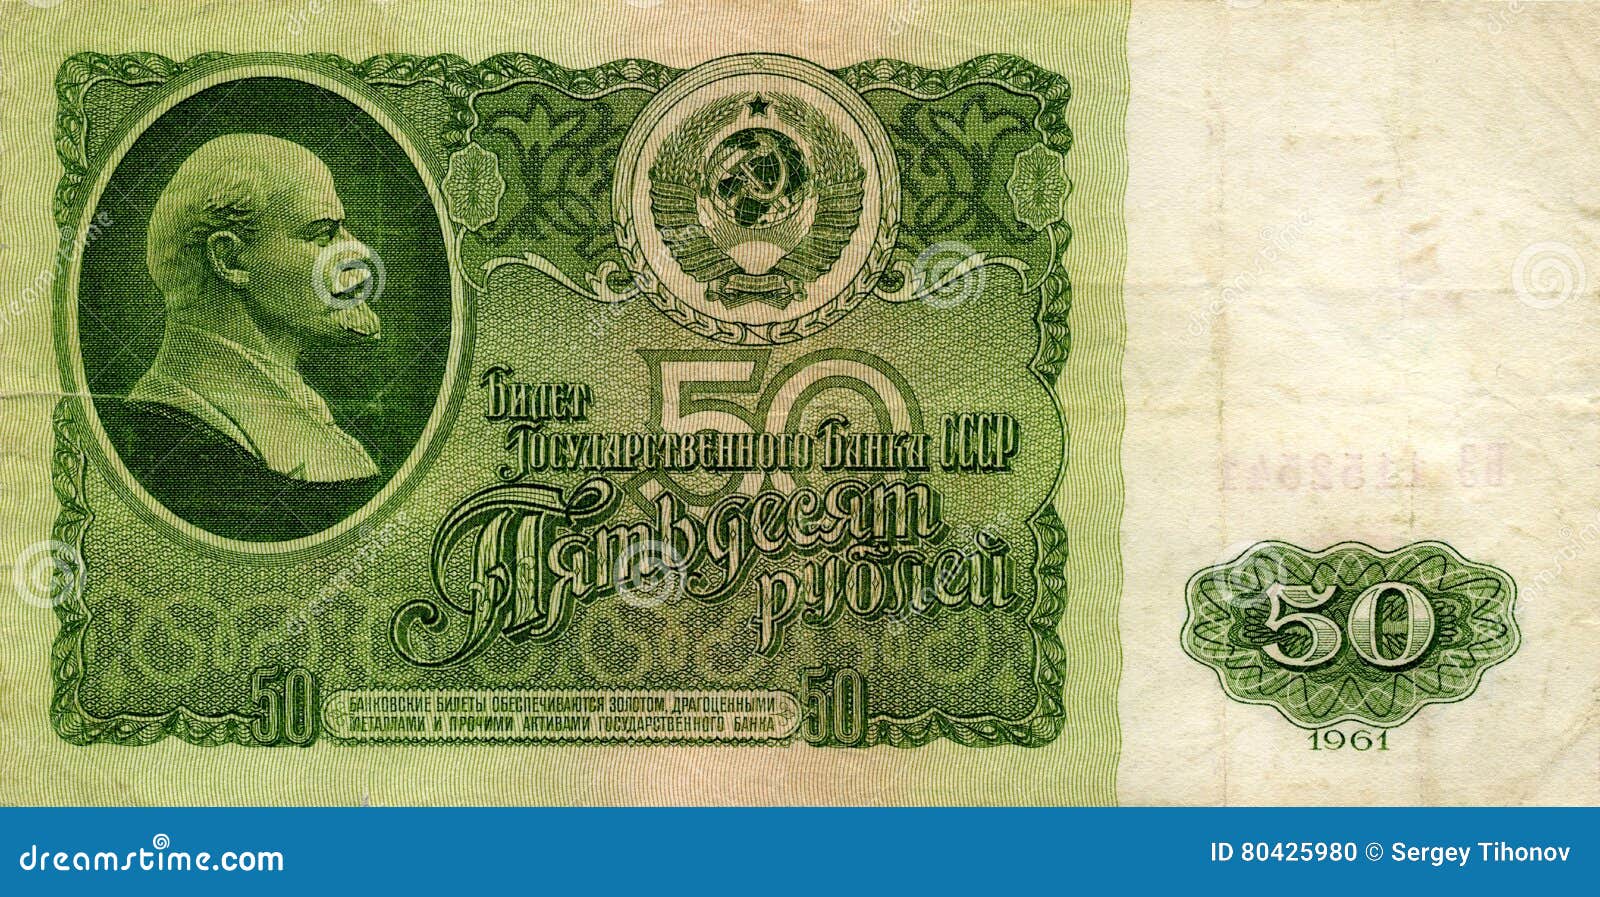 banknote of the ussr 50 rubles 1961 front side